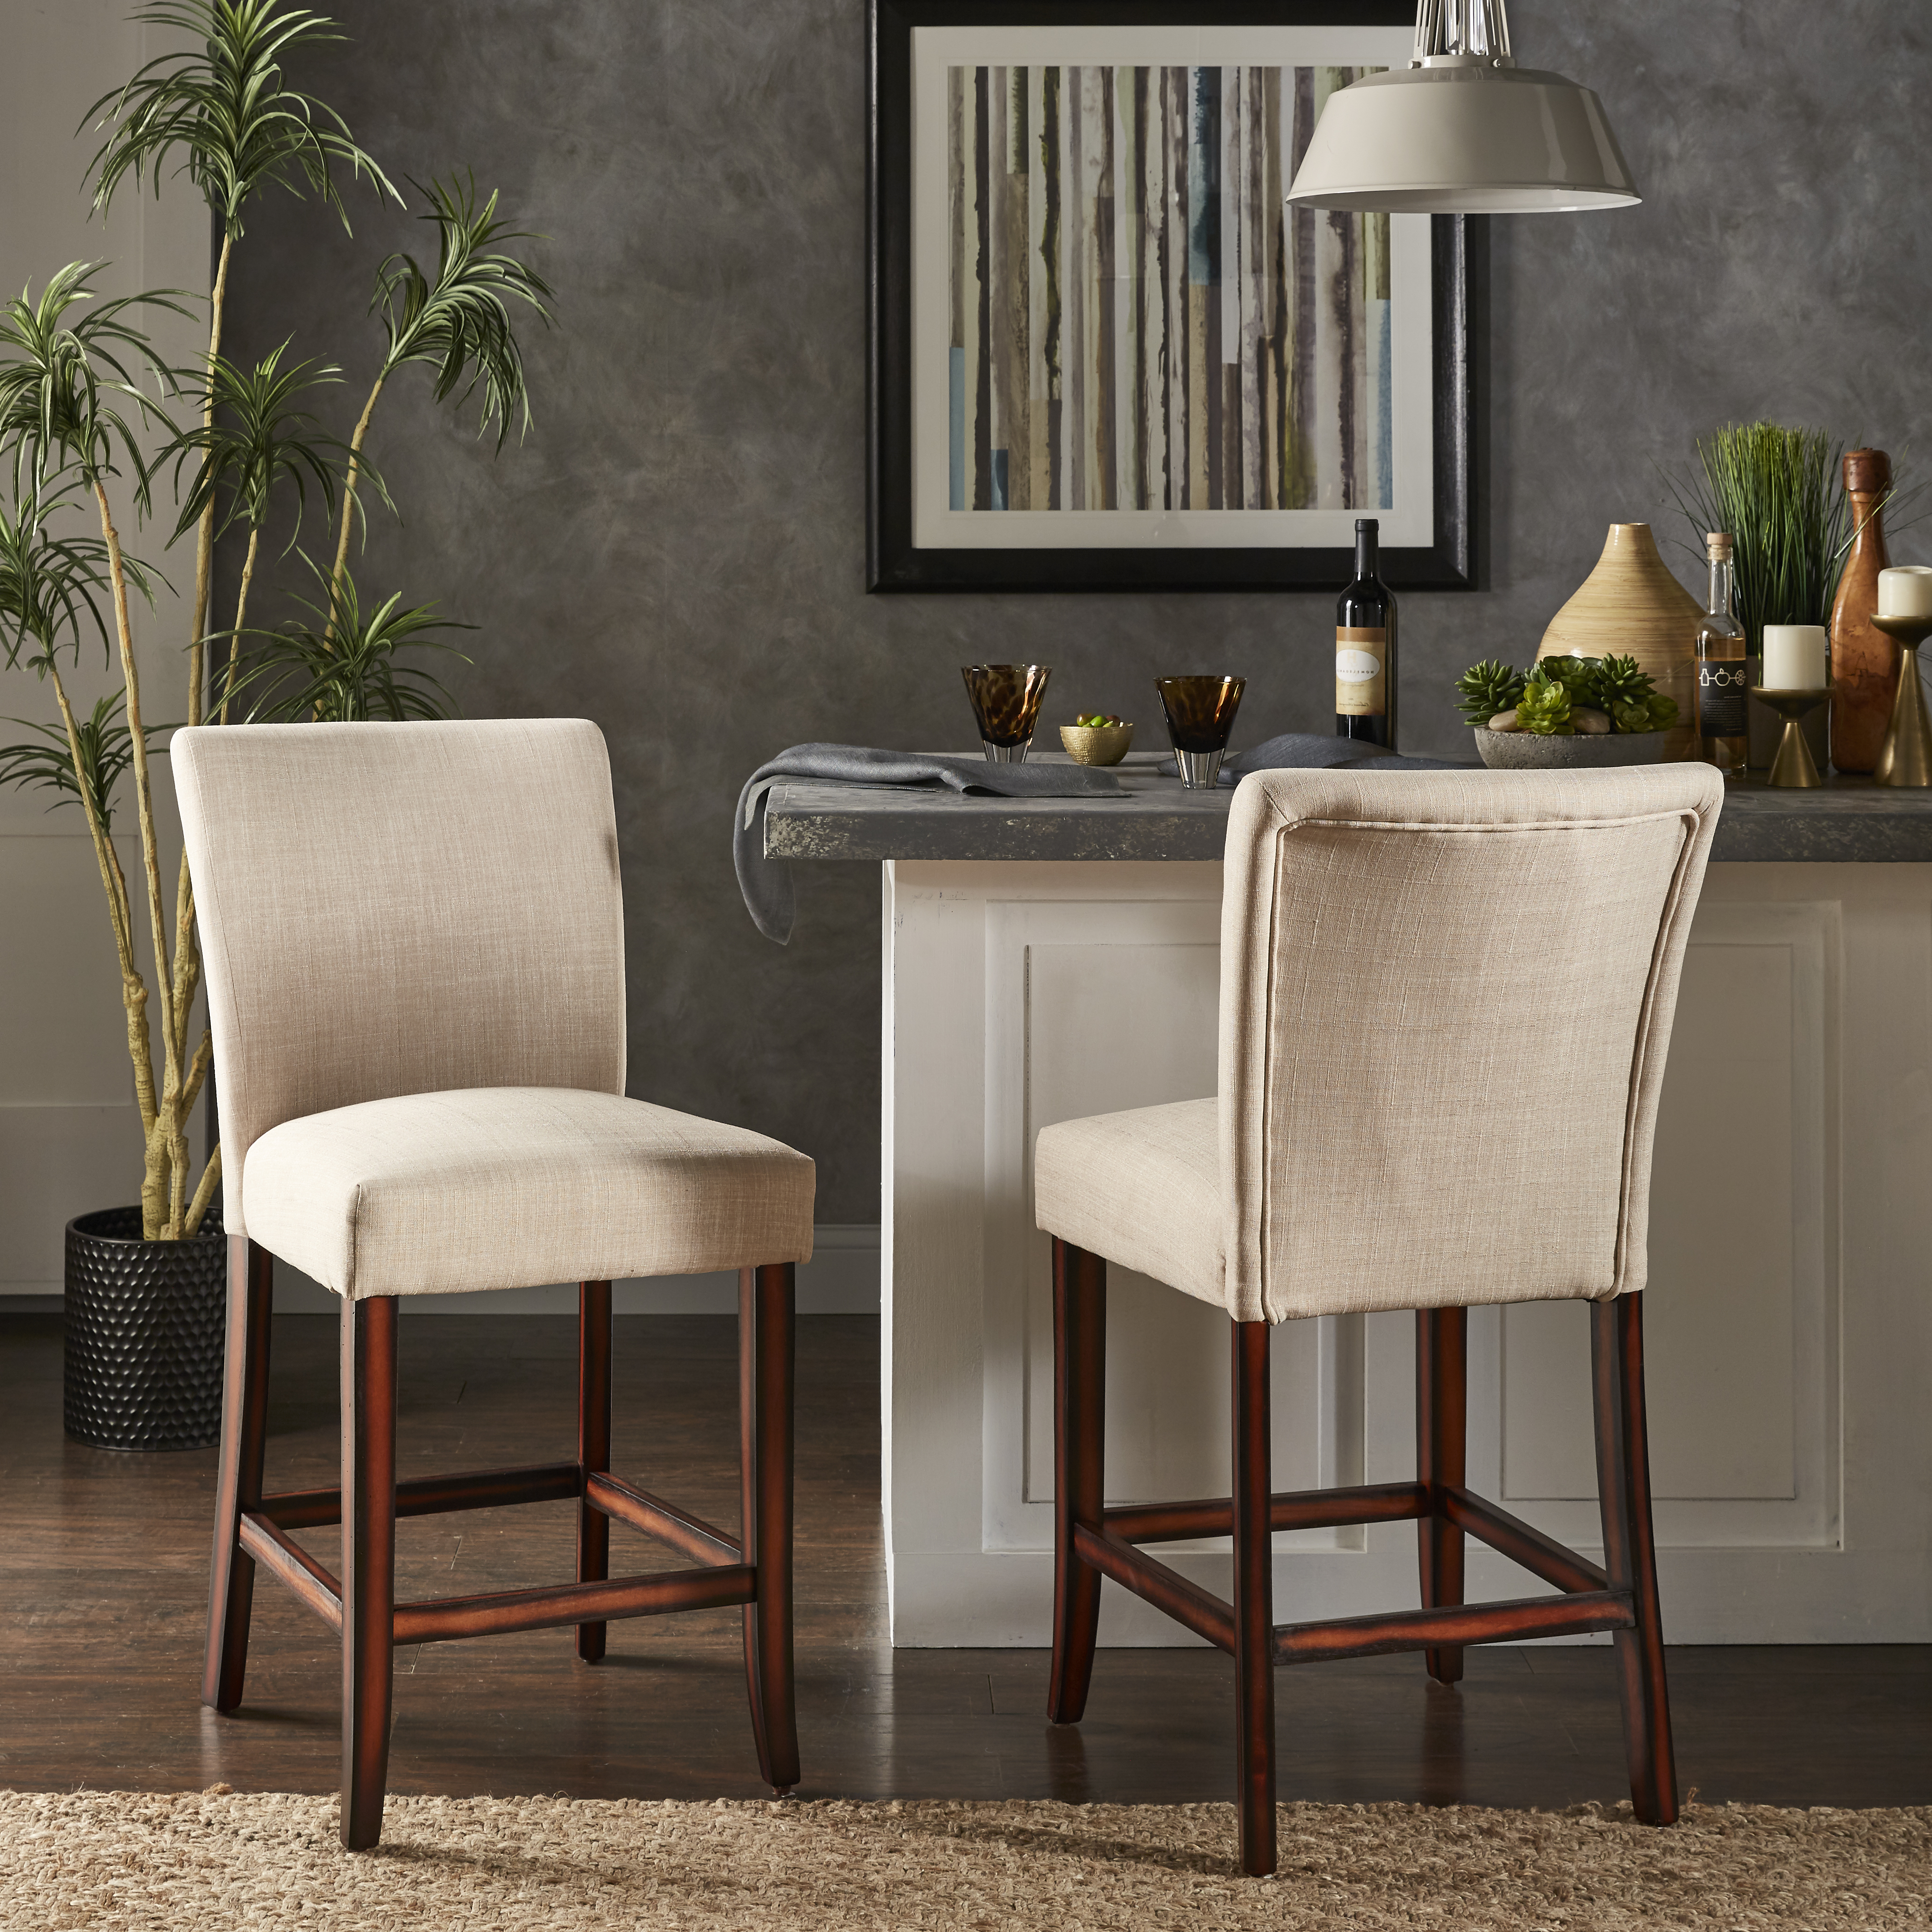 Classic Upholstered High Back Counter Height Chairs (Set of 2)